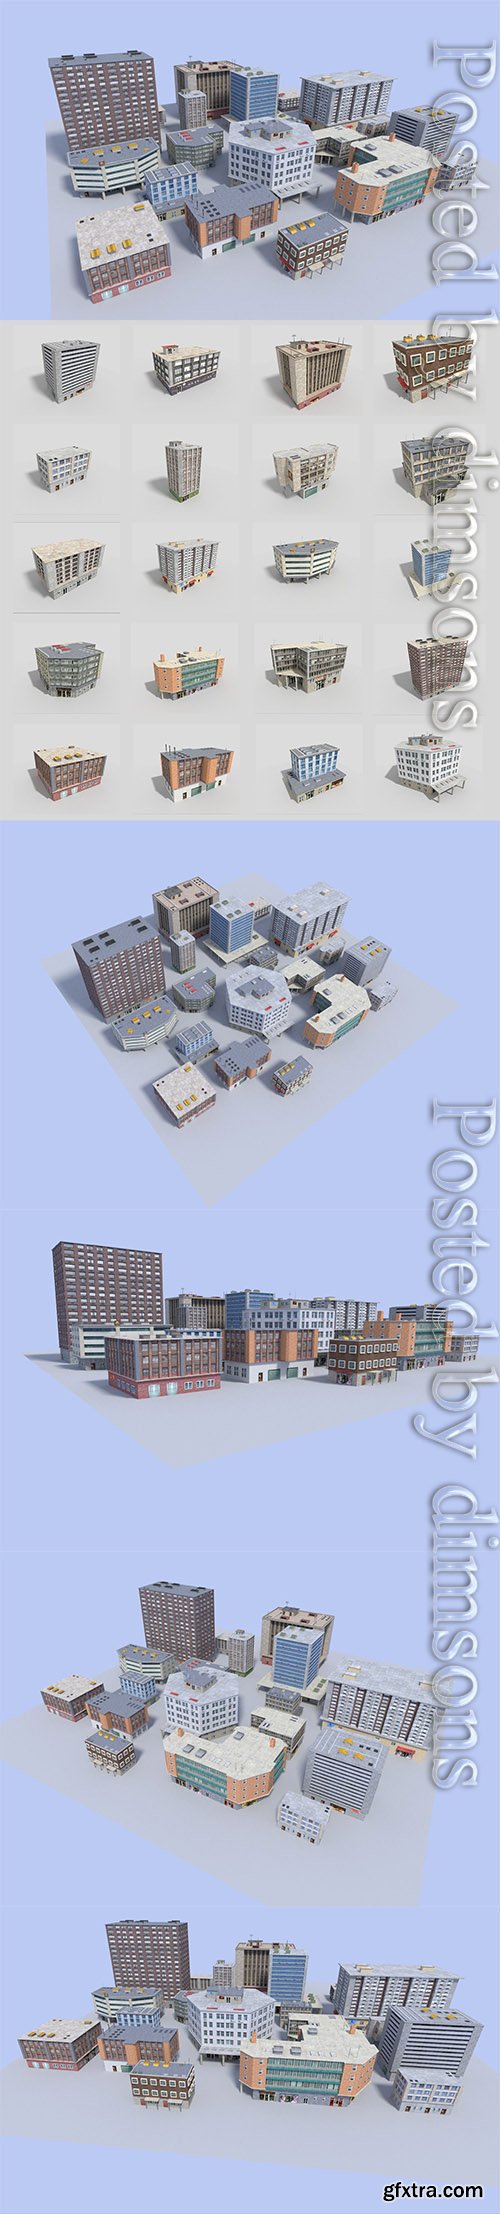 Cgtrader - 20 city building collection Low-poly 3D model